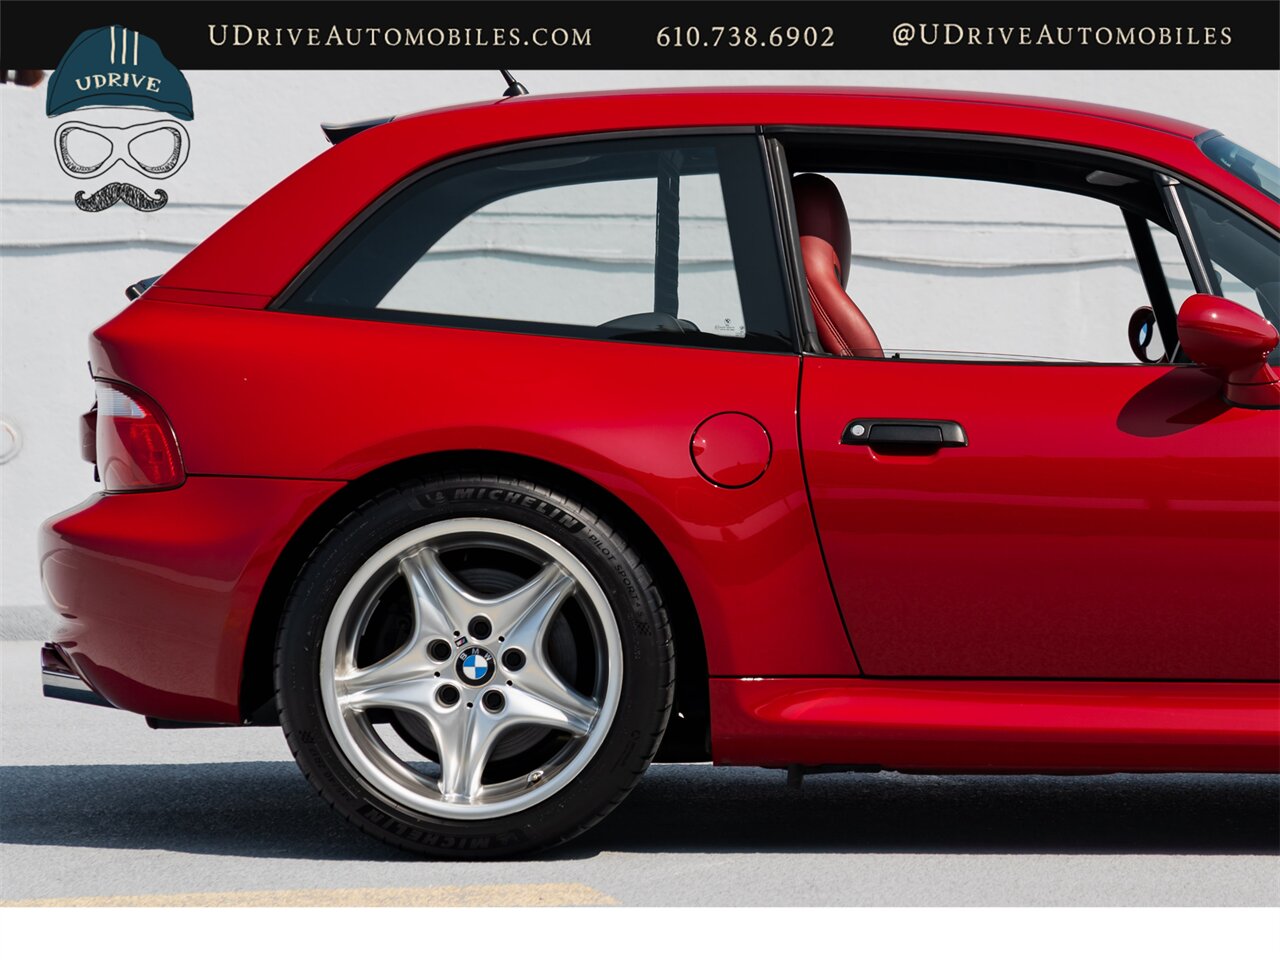 2000 BMW Z3 M  Coupe 25k Miles  Sunroof Delete $4k Recent Service - Photo 18 - West Chester, PA 19382